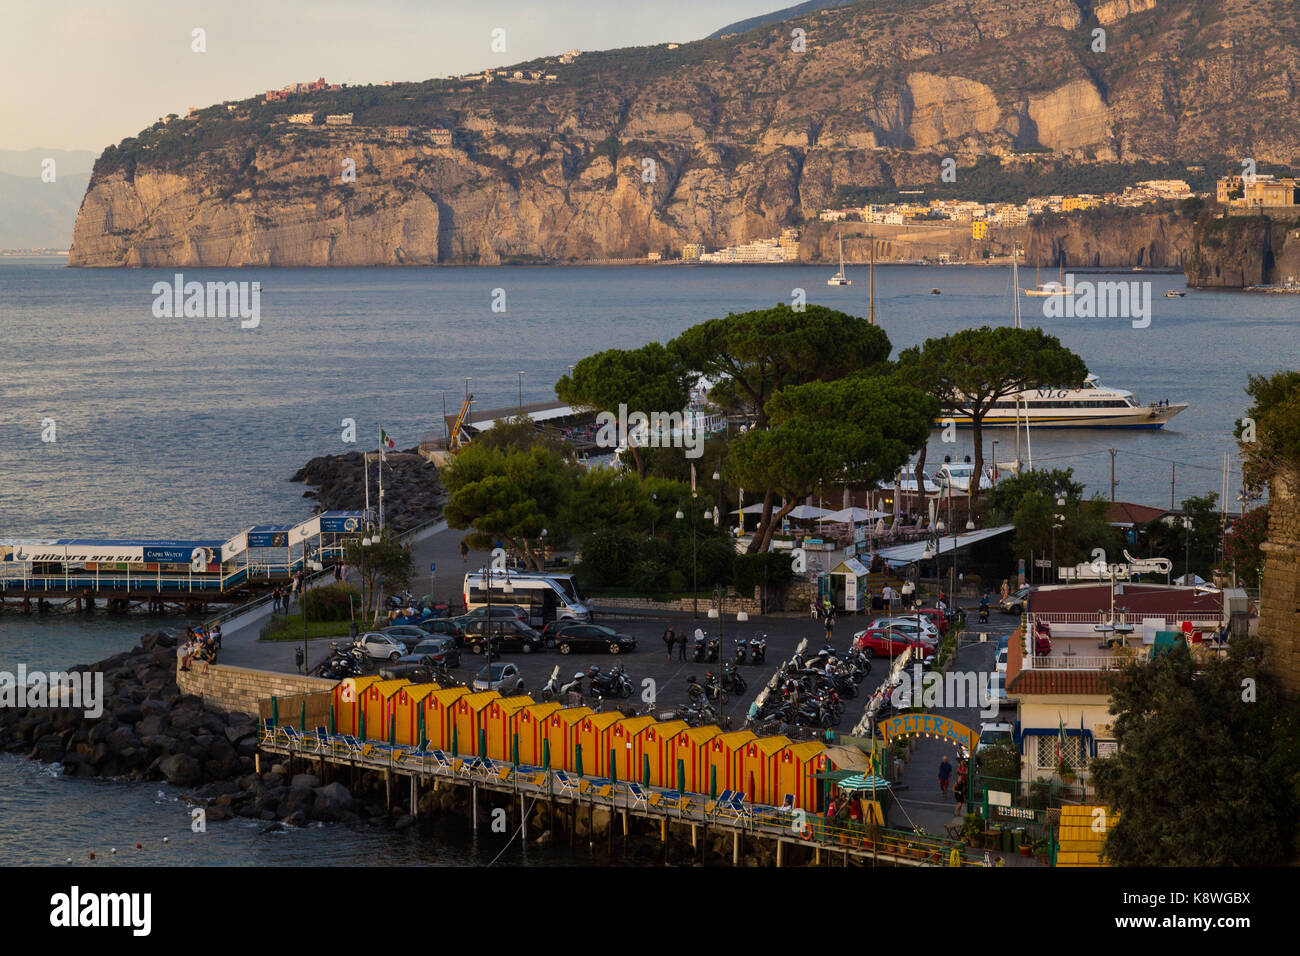 Sorrento, Italy, September 16 2017. The late afternoon sun casts a warm, golden glow over Marina Piccola in Sorrento, Italy. © Paul Davey Stock Photo